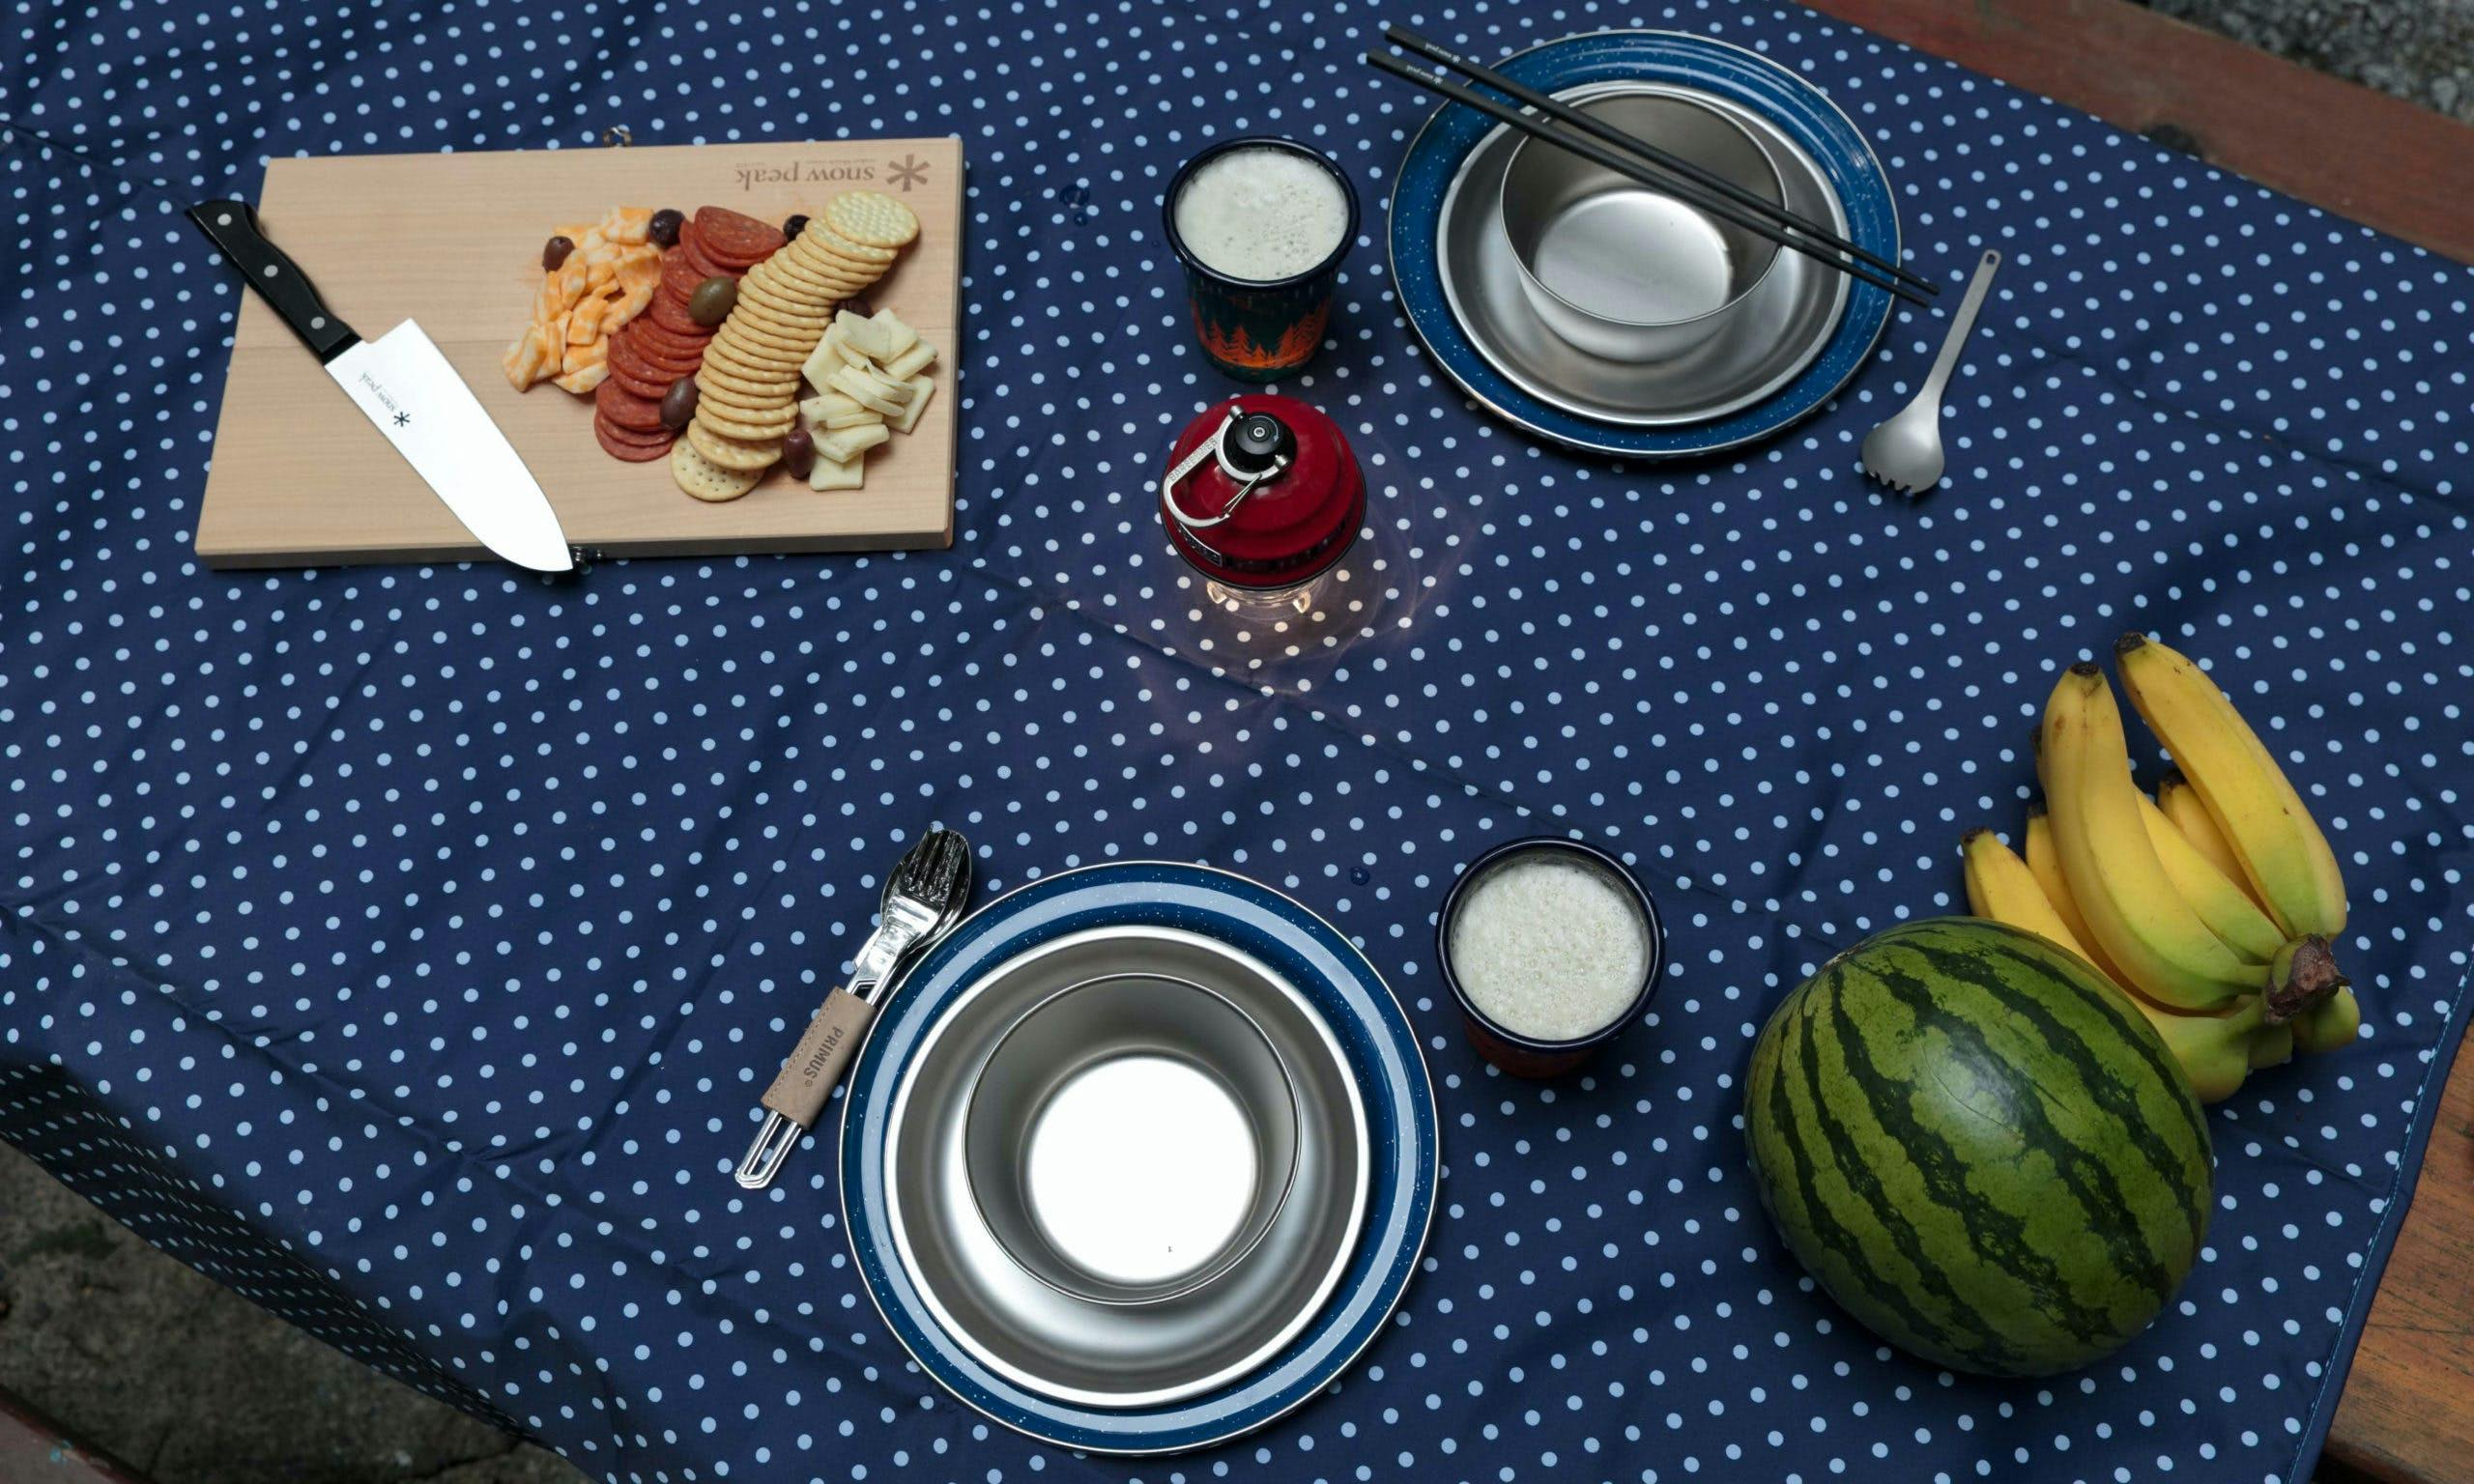 Picnic set-up with camping utensils, bananas, watermelon and a board with crackers and cheese